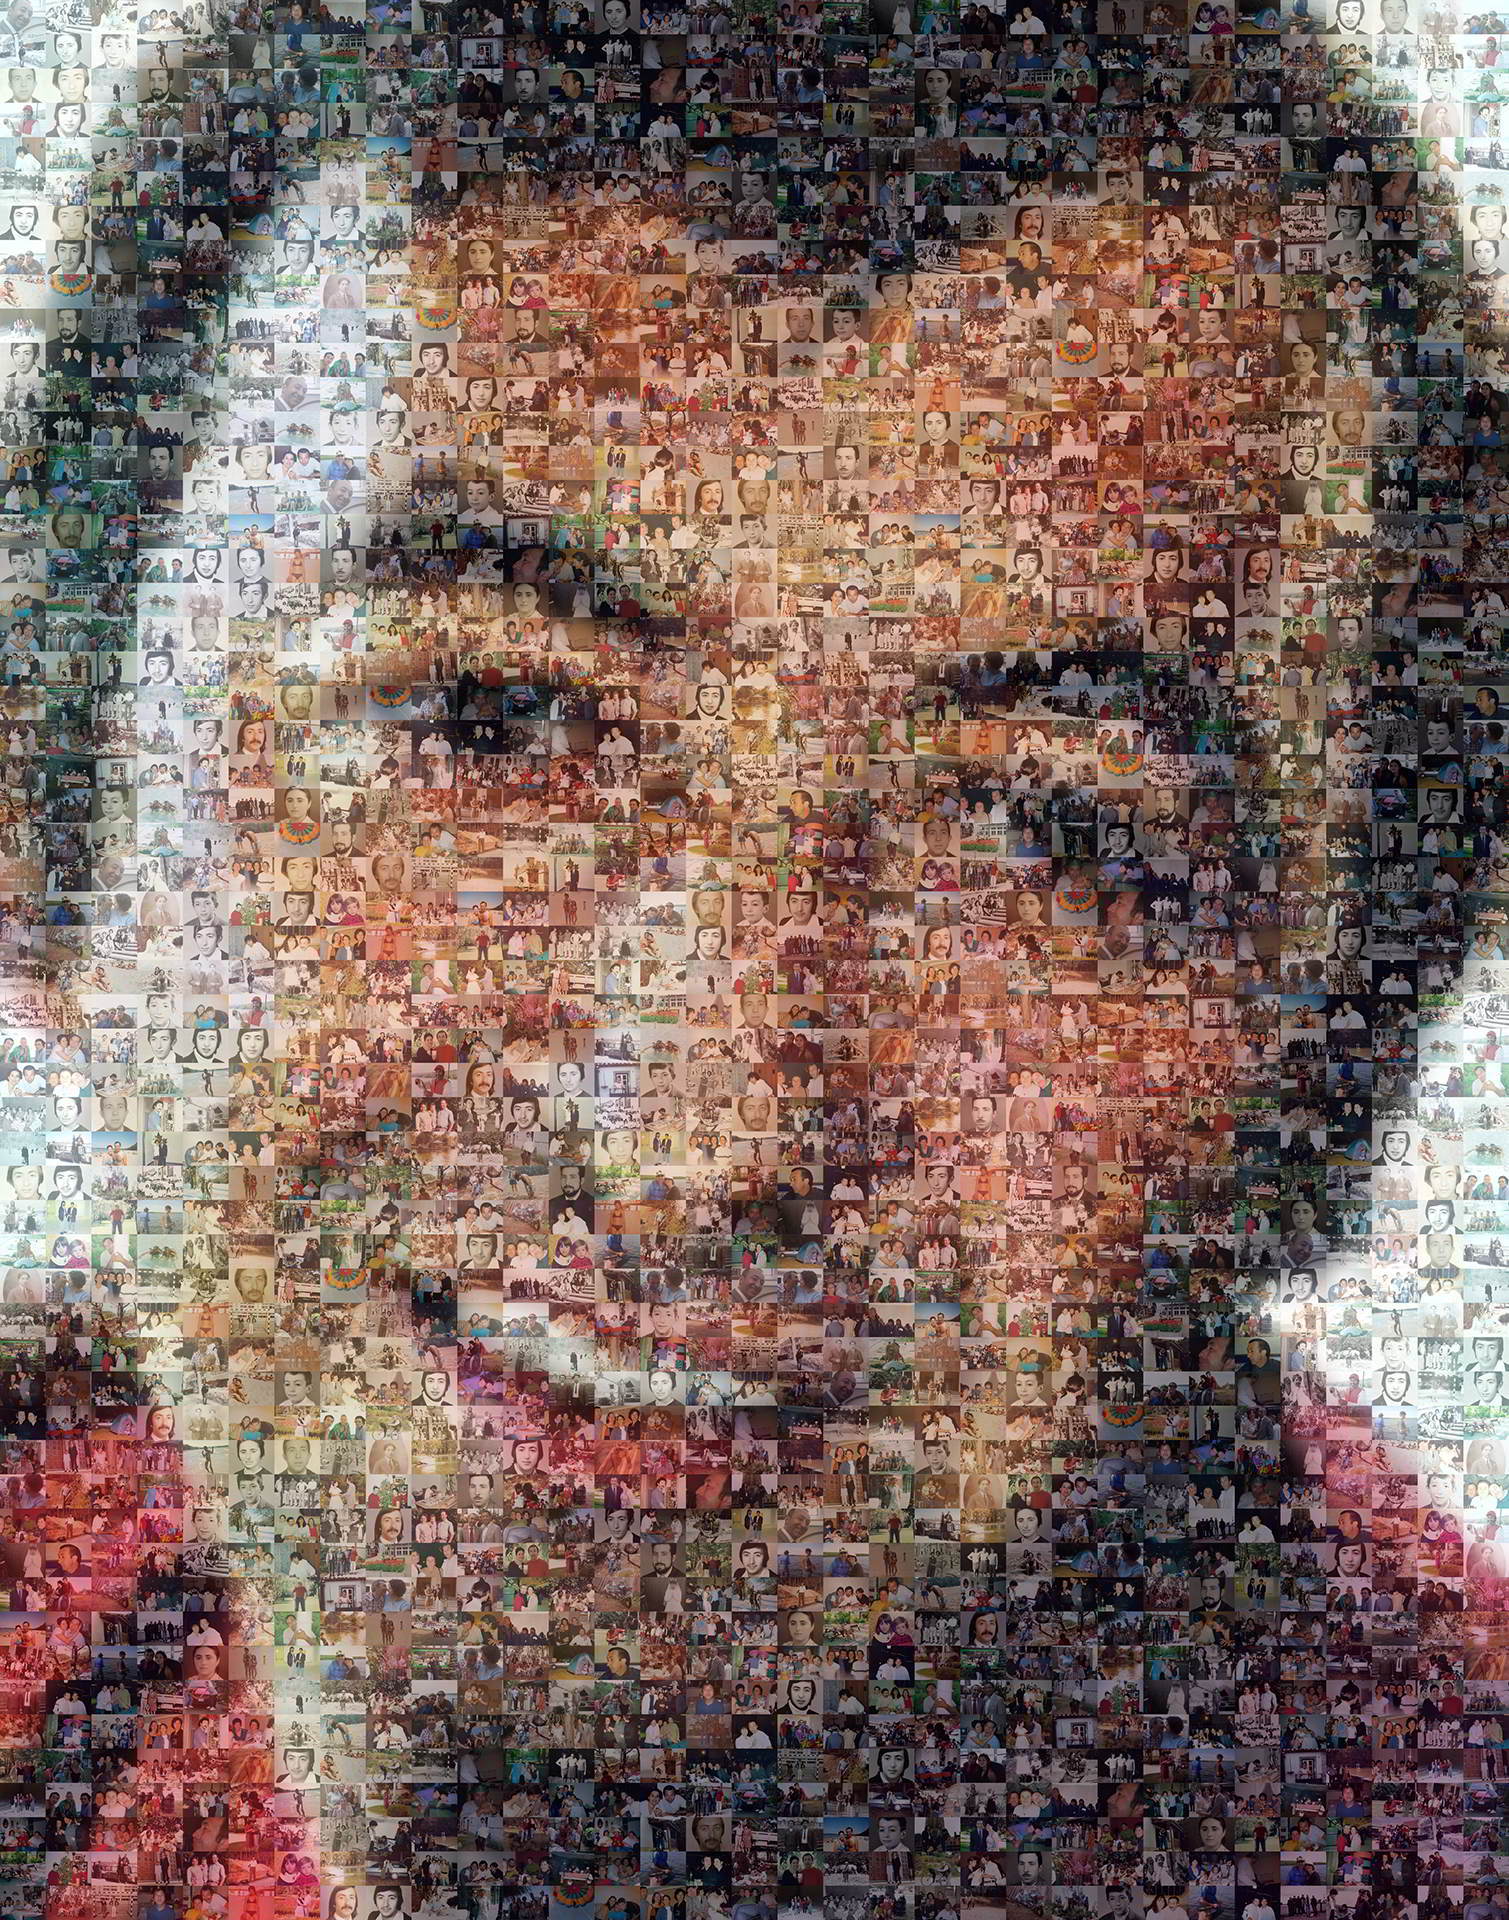 photo mosaic created using only 195 photos from past to present